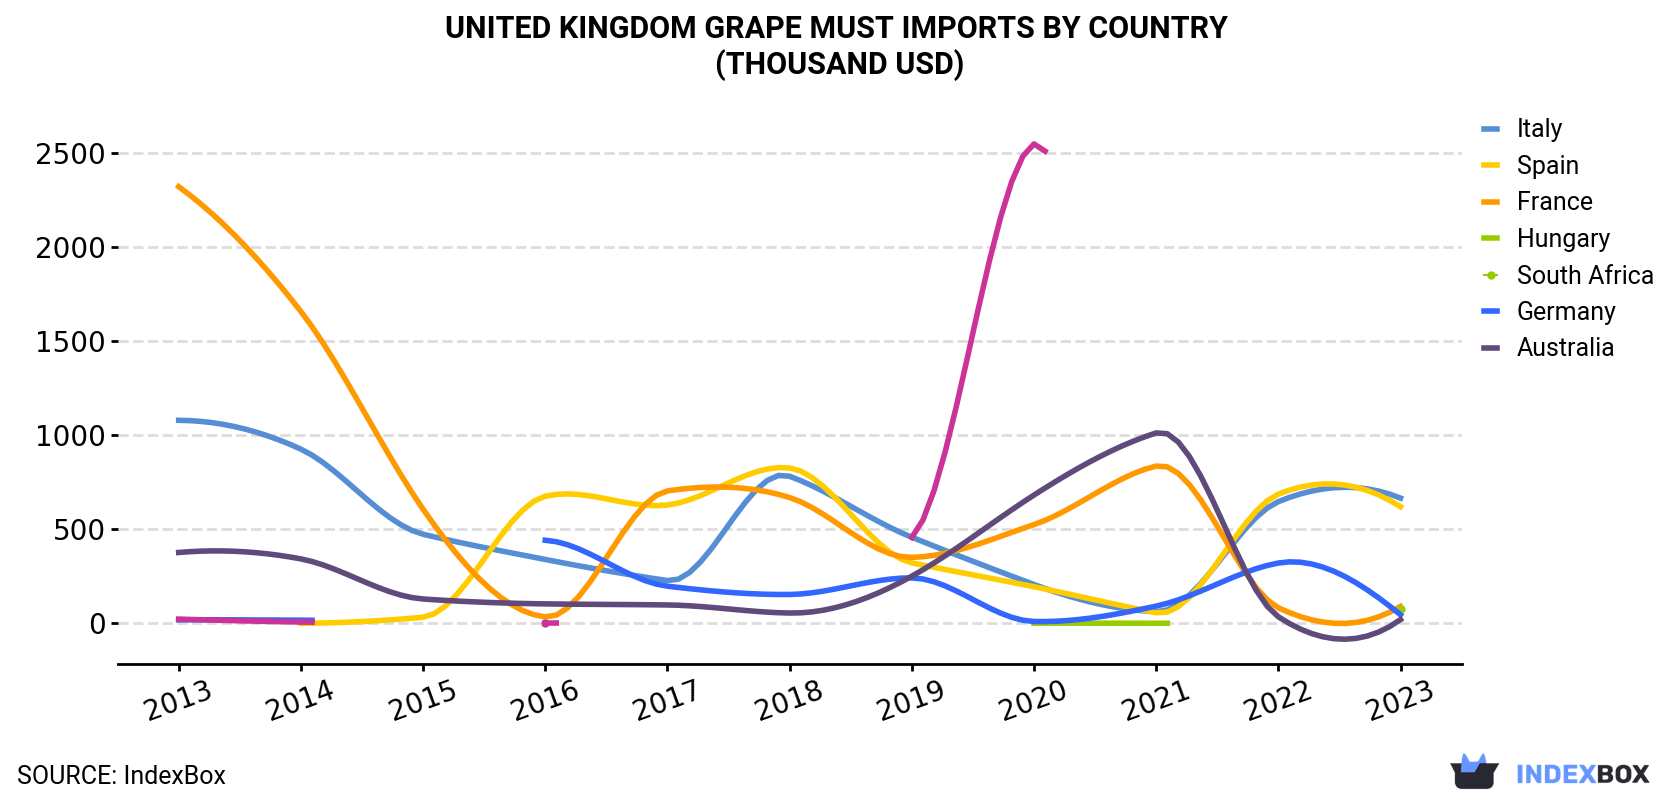 United Kingdom Grape Must Imports By Country (Thousand USD)